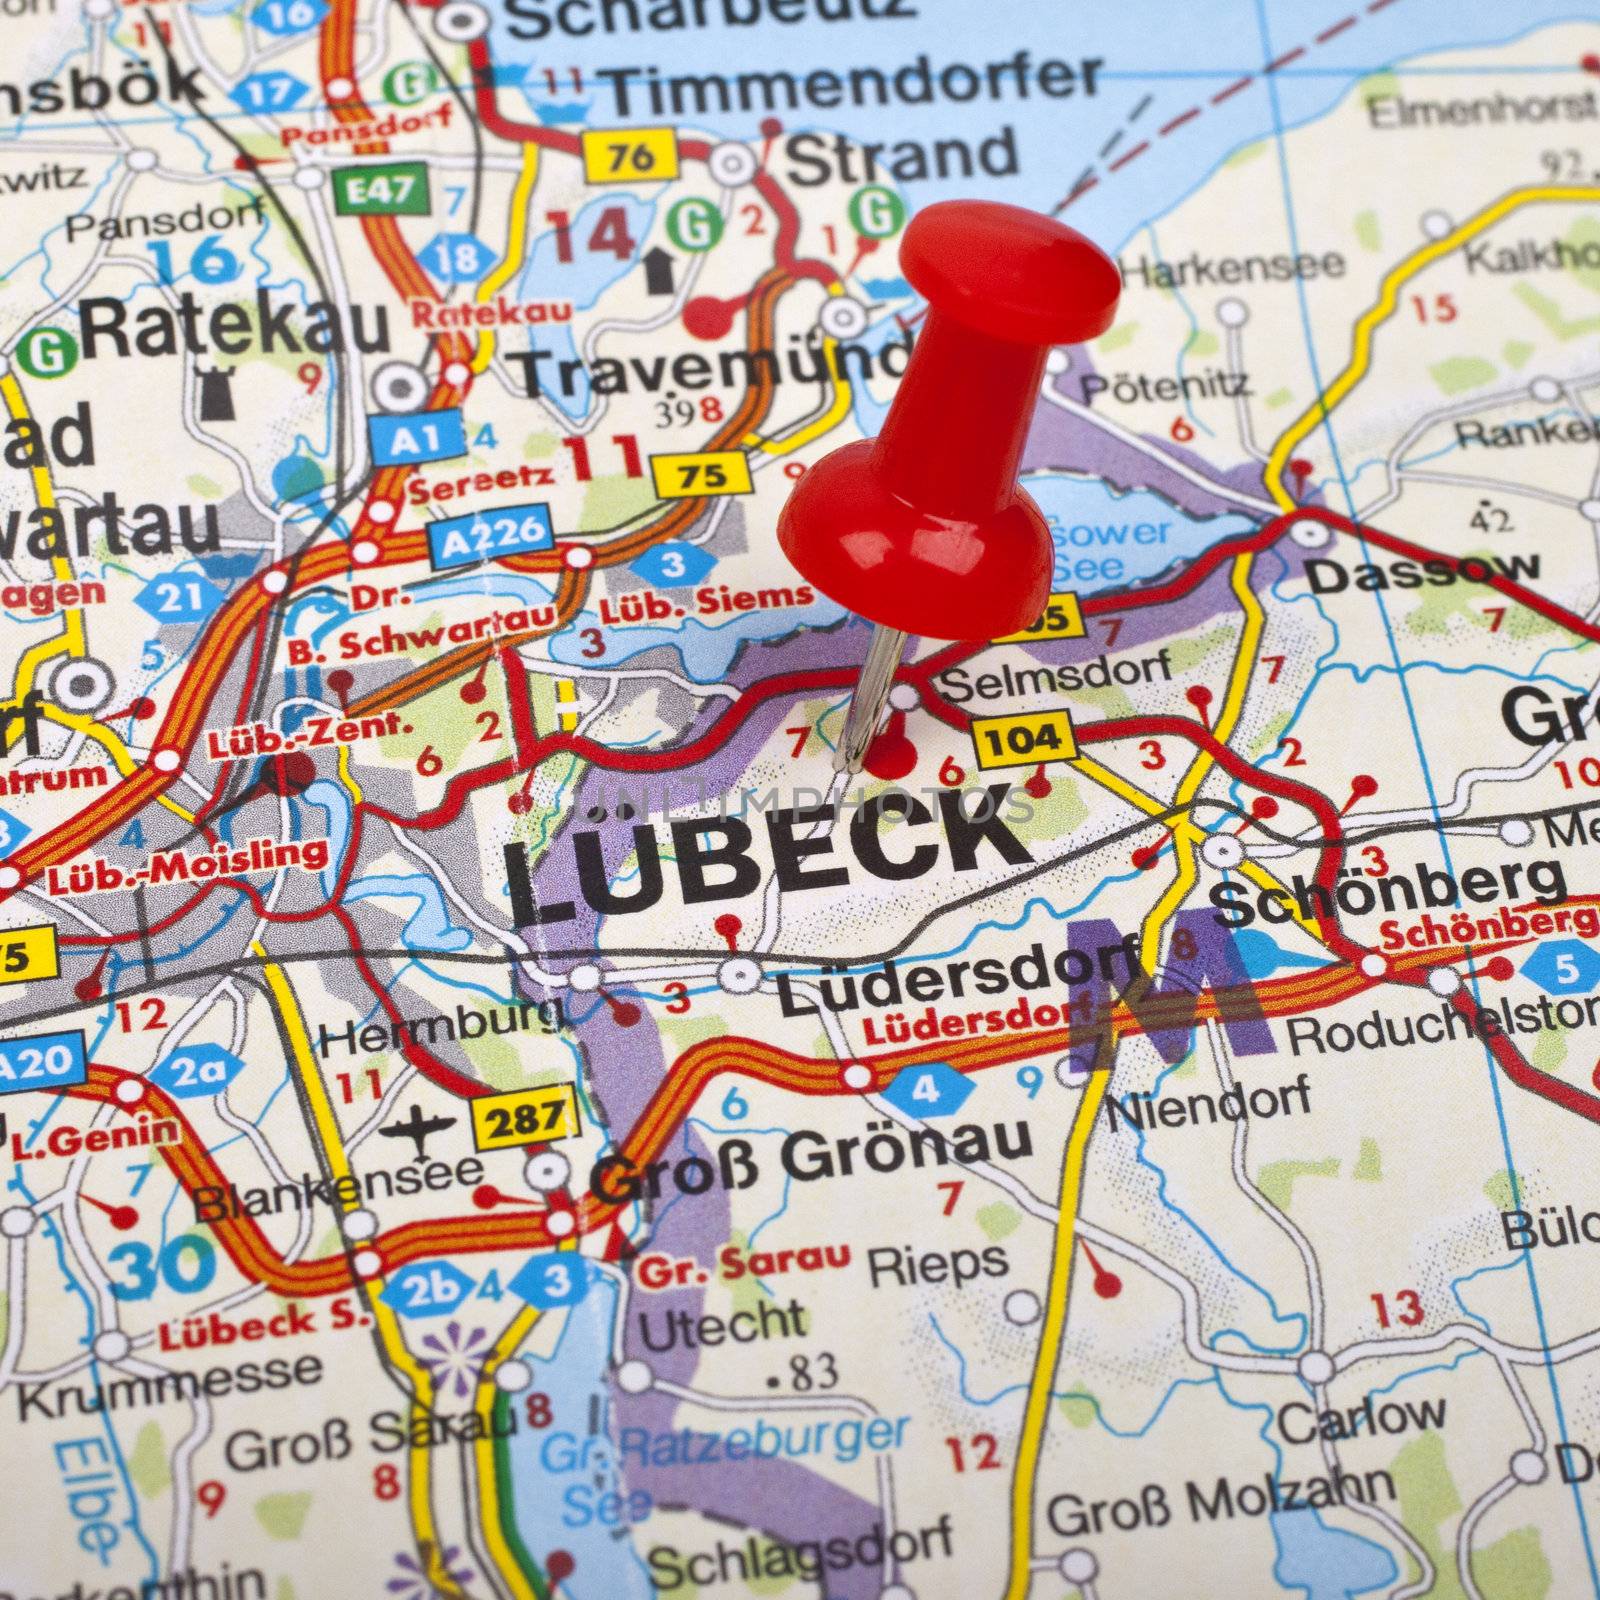 Lubeck pin-pointed on a map.